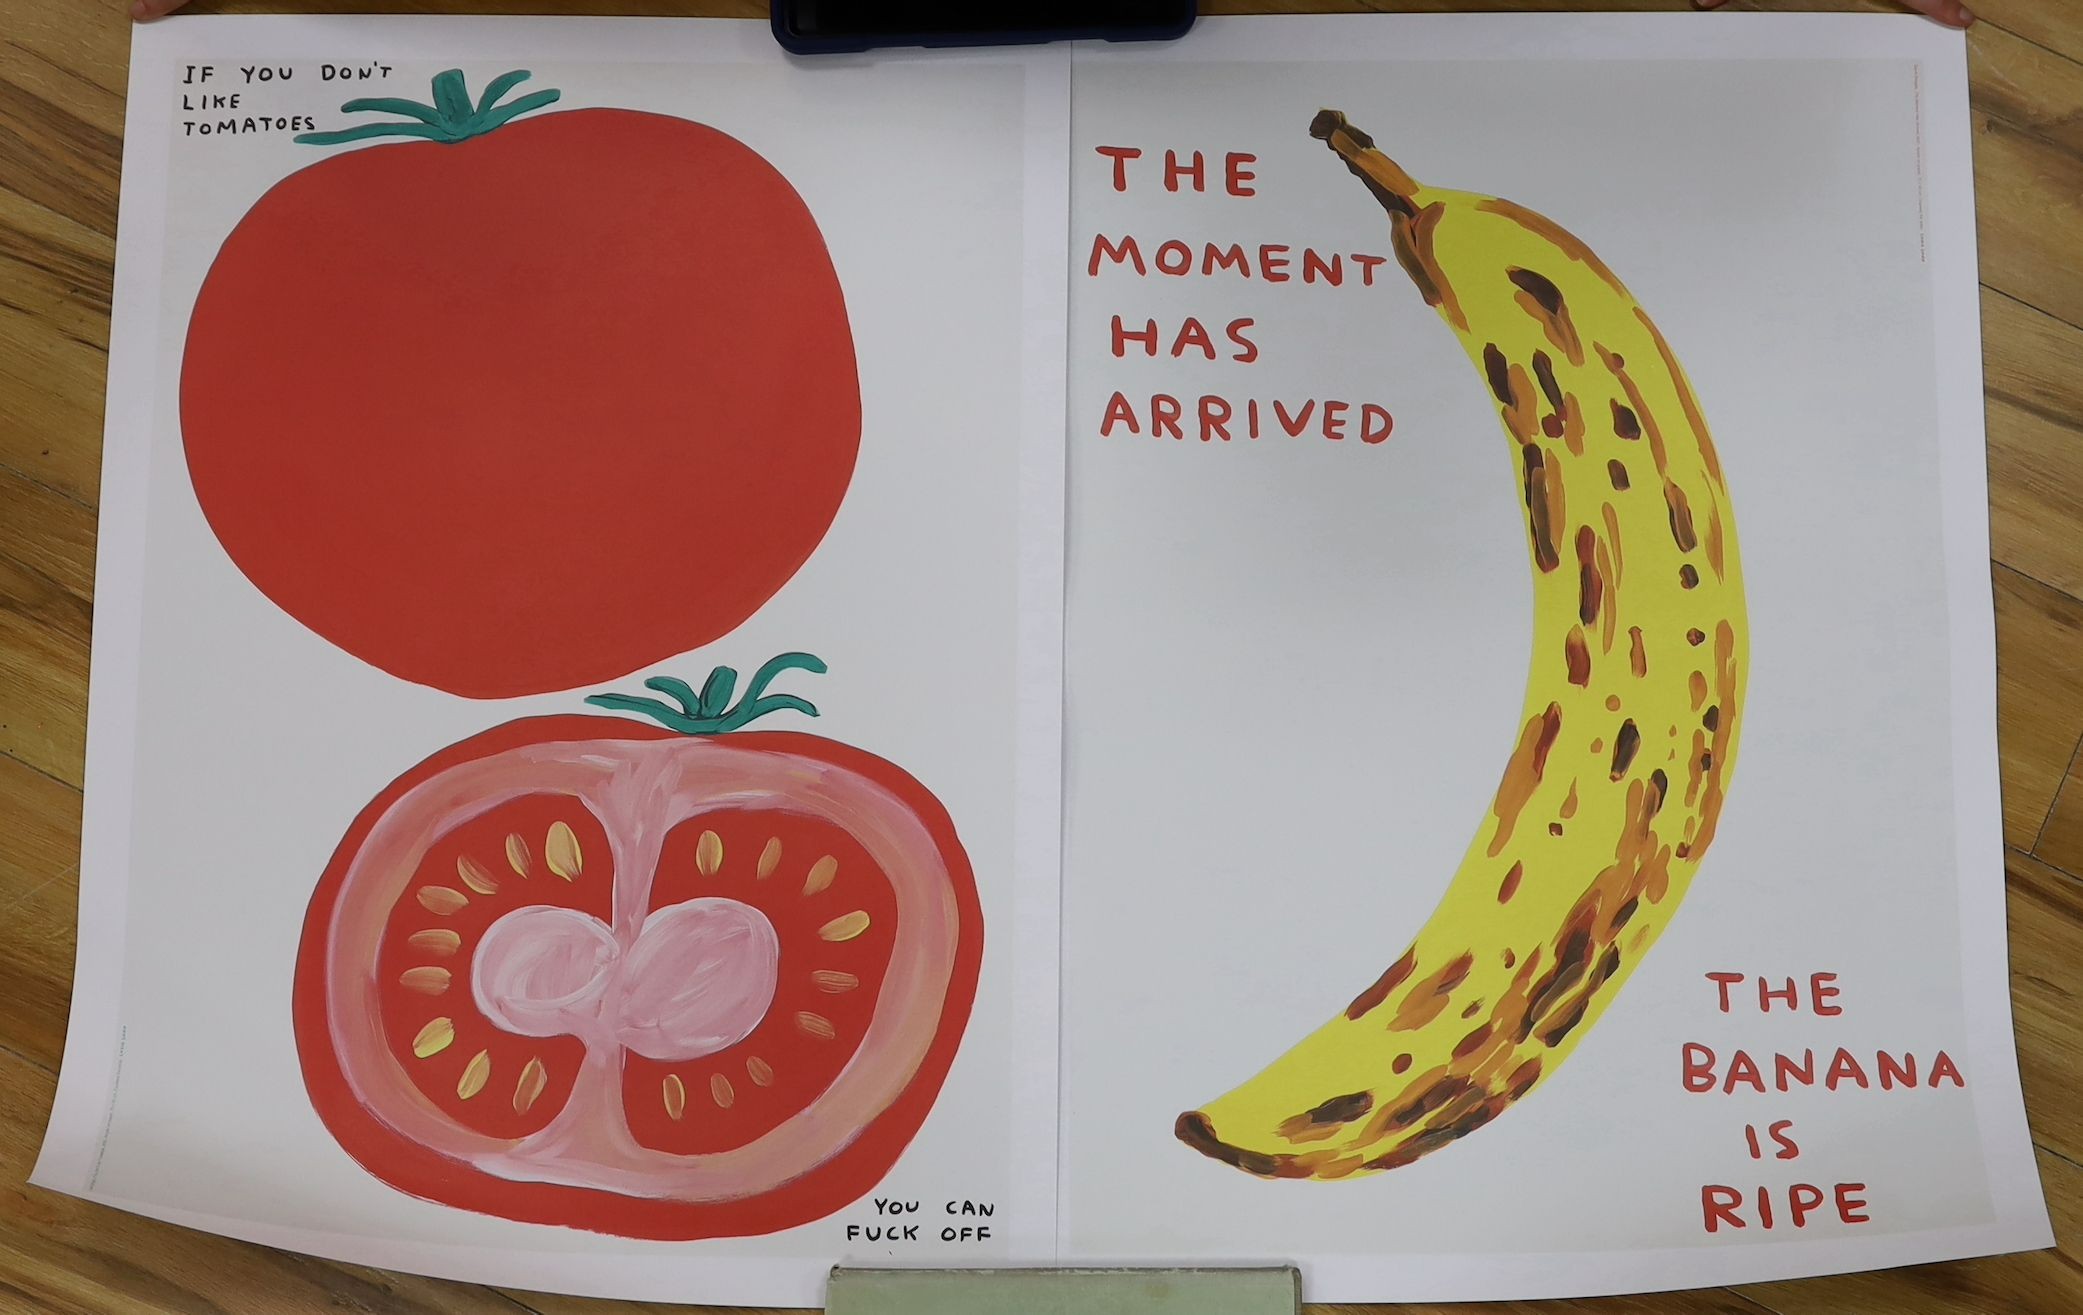 David Shrigley (1968-), two colour prints, 'If you don't like tomatoes' and 'The moment has arrived', 81 x 60cm, unframed